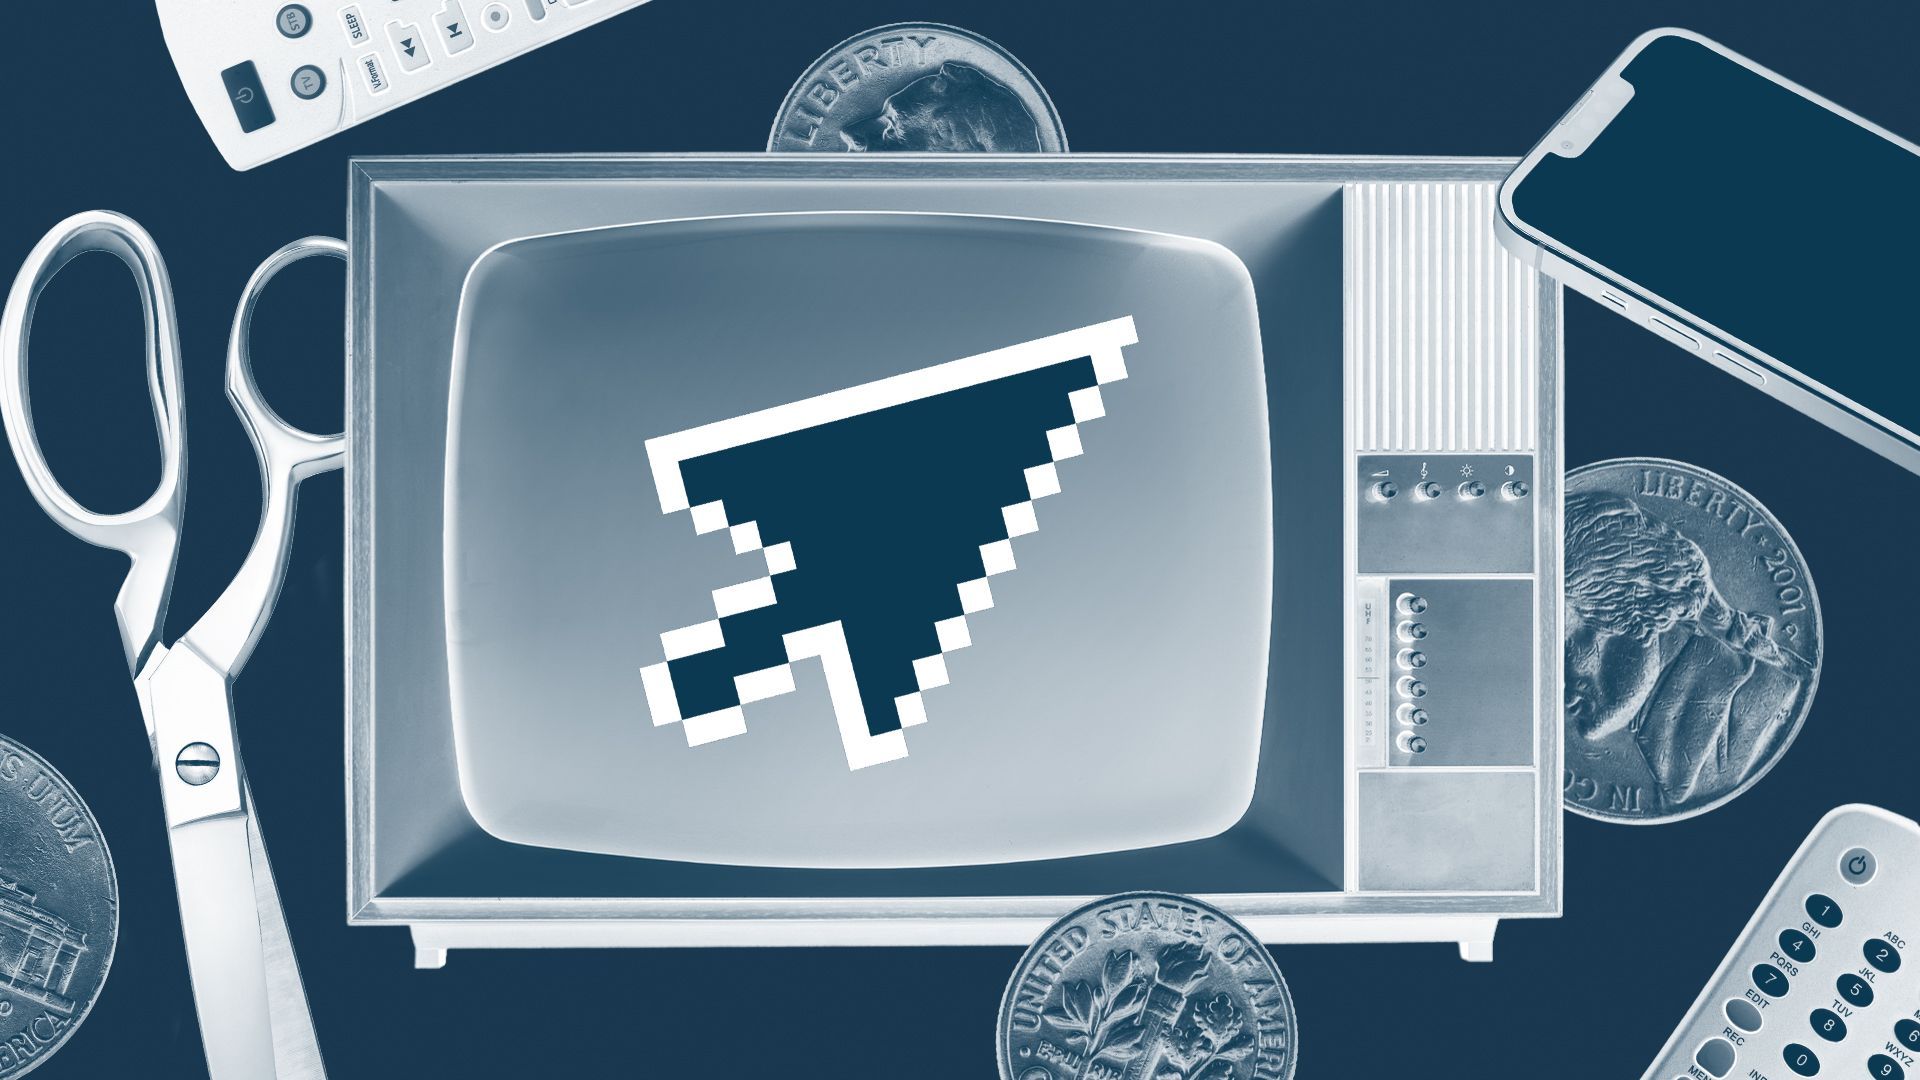 Illustration of a TV with a cursor on the screen surrounded by dimes, nickels, a phone, scissors and remotes